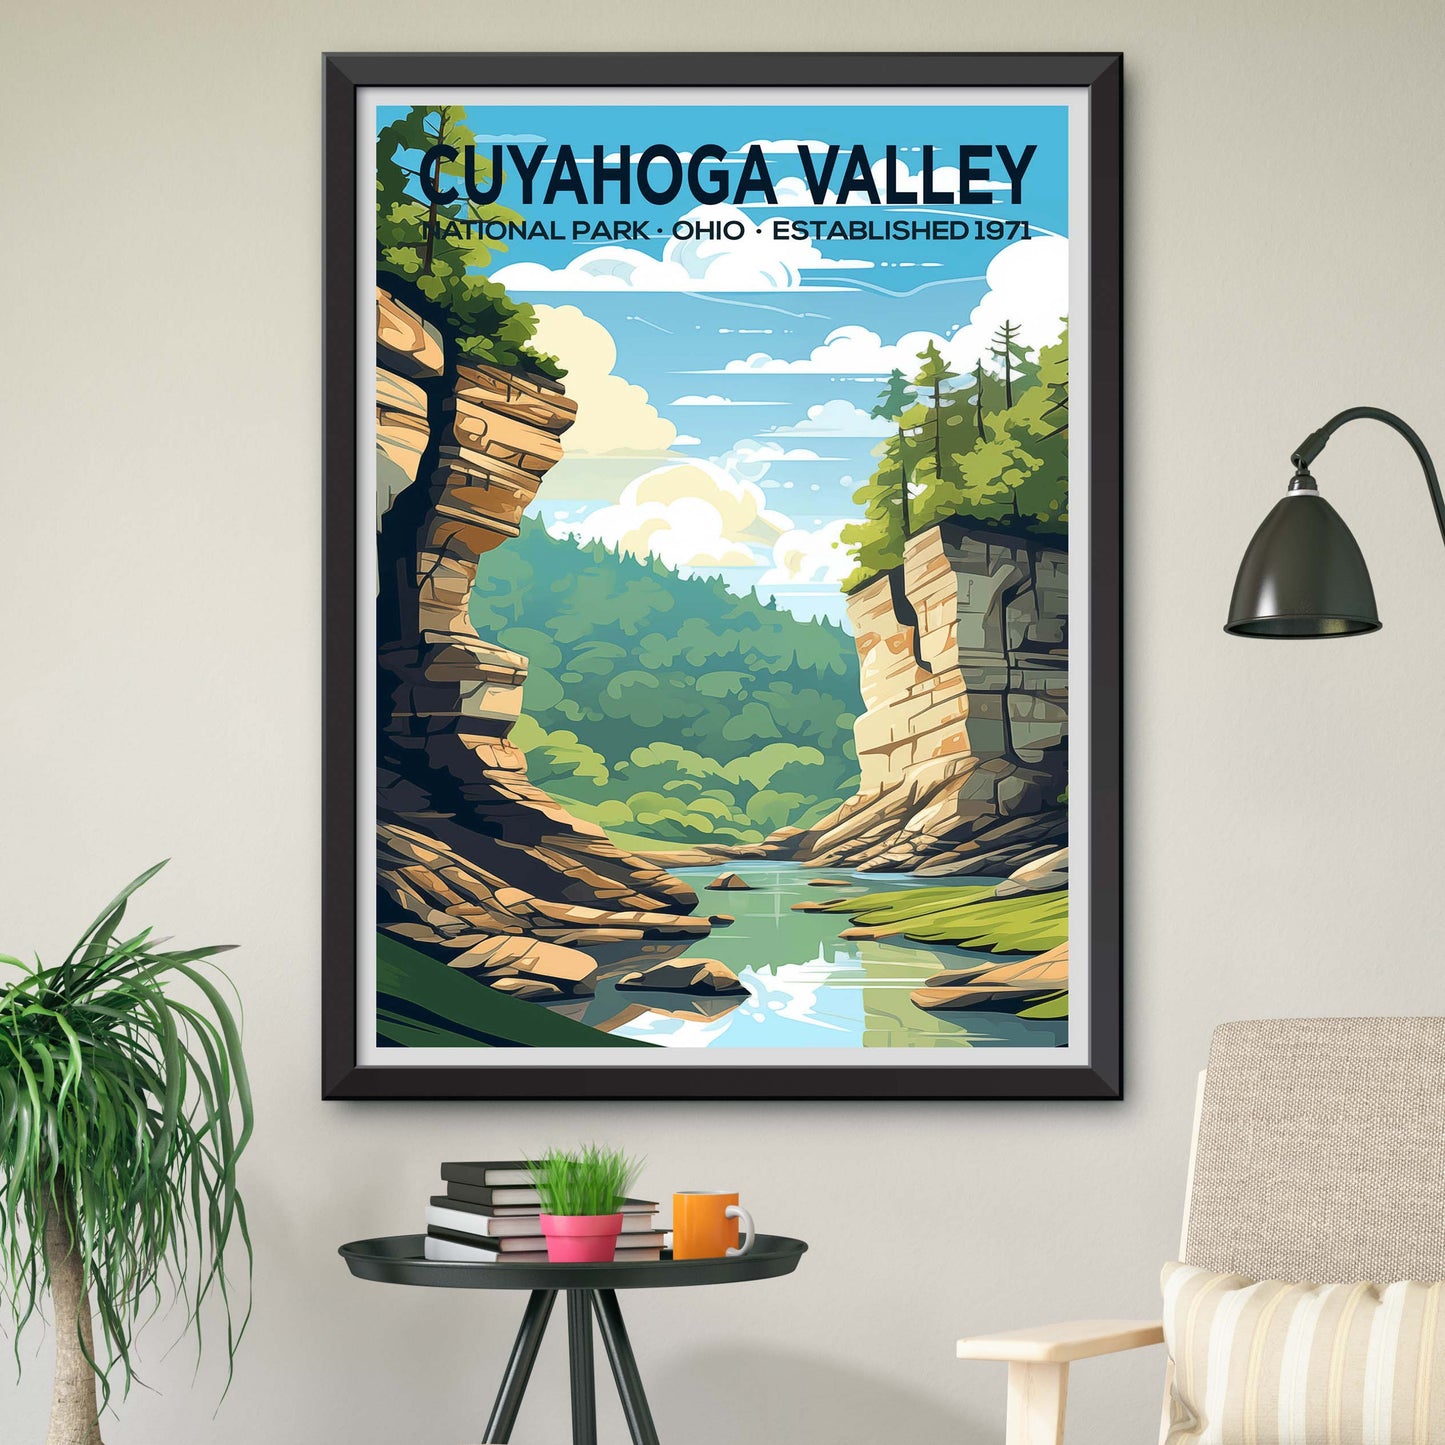 Cuyahoga Valley National Park Vintage-Style Travel Poster